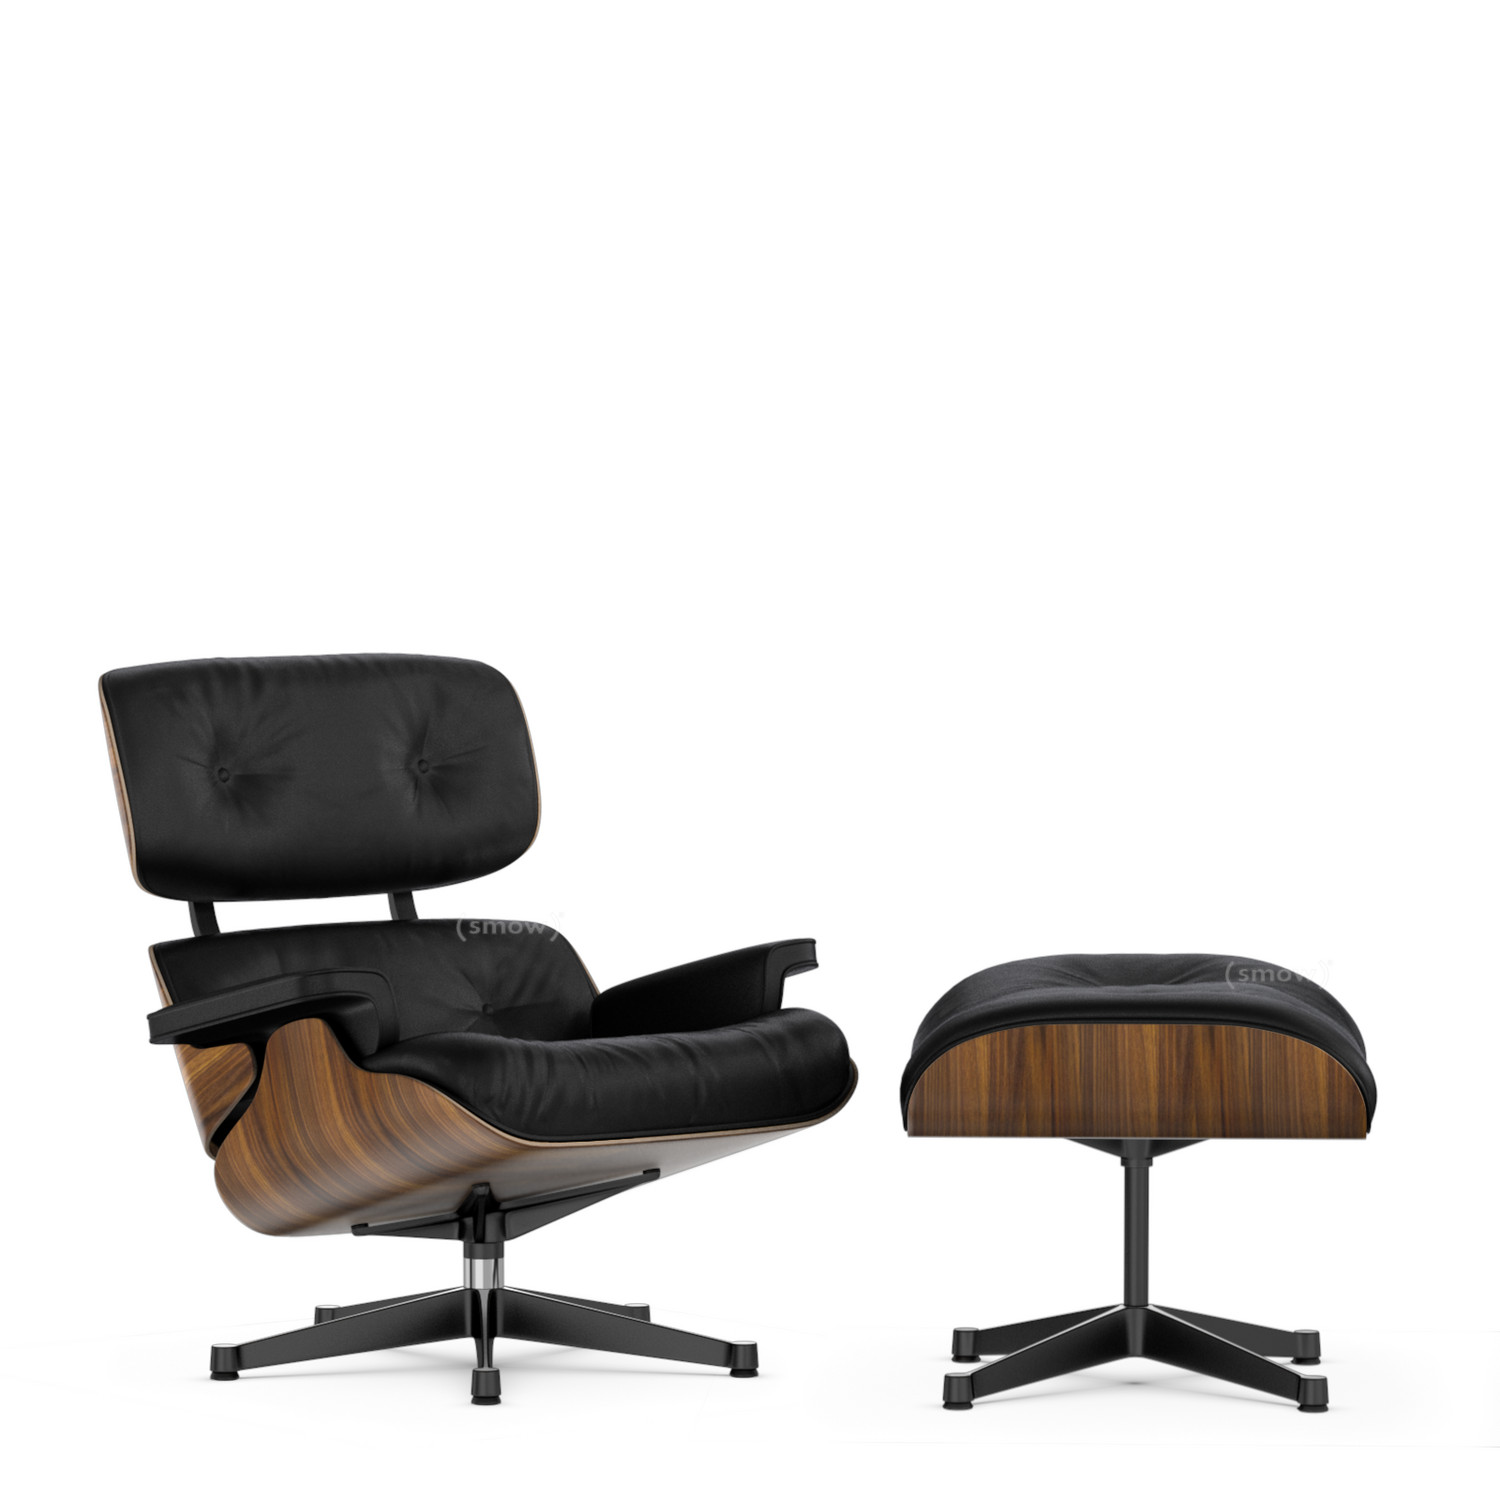 Vitra Lounge Chair Ottoman Walnut, Black Leather Chair With Ottoman